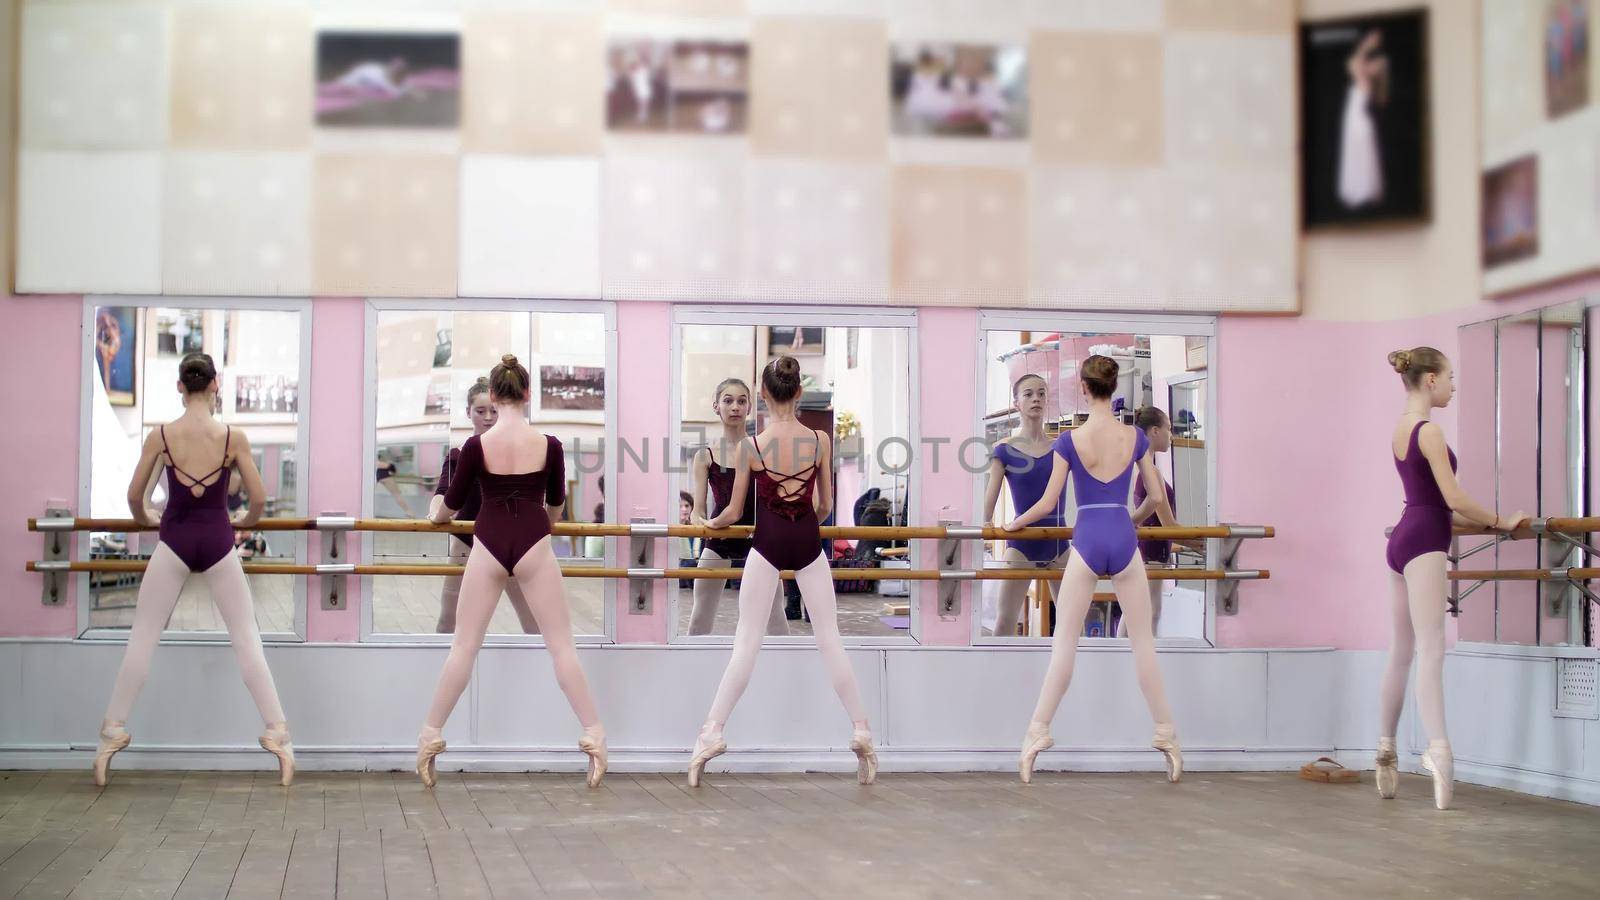 in ballet hall, Young ballerinas in purple leotards perform pas eshappe, going up, standing on toes in pointe shoes at railing in ballet hall. High quality photo